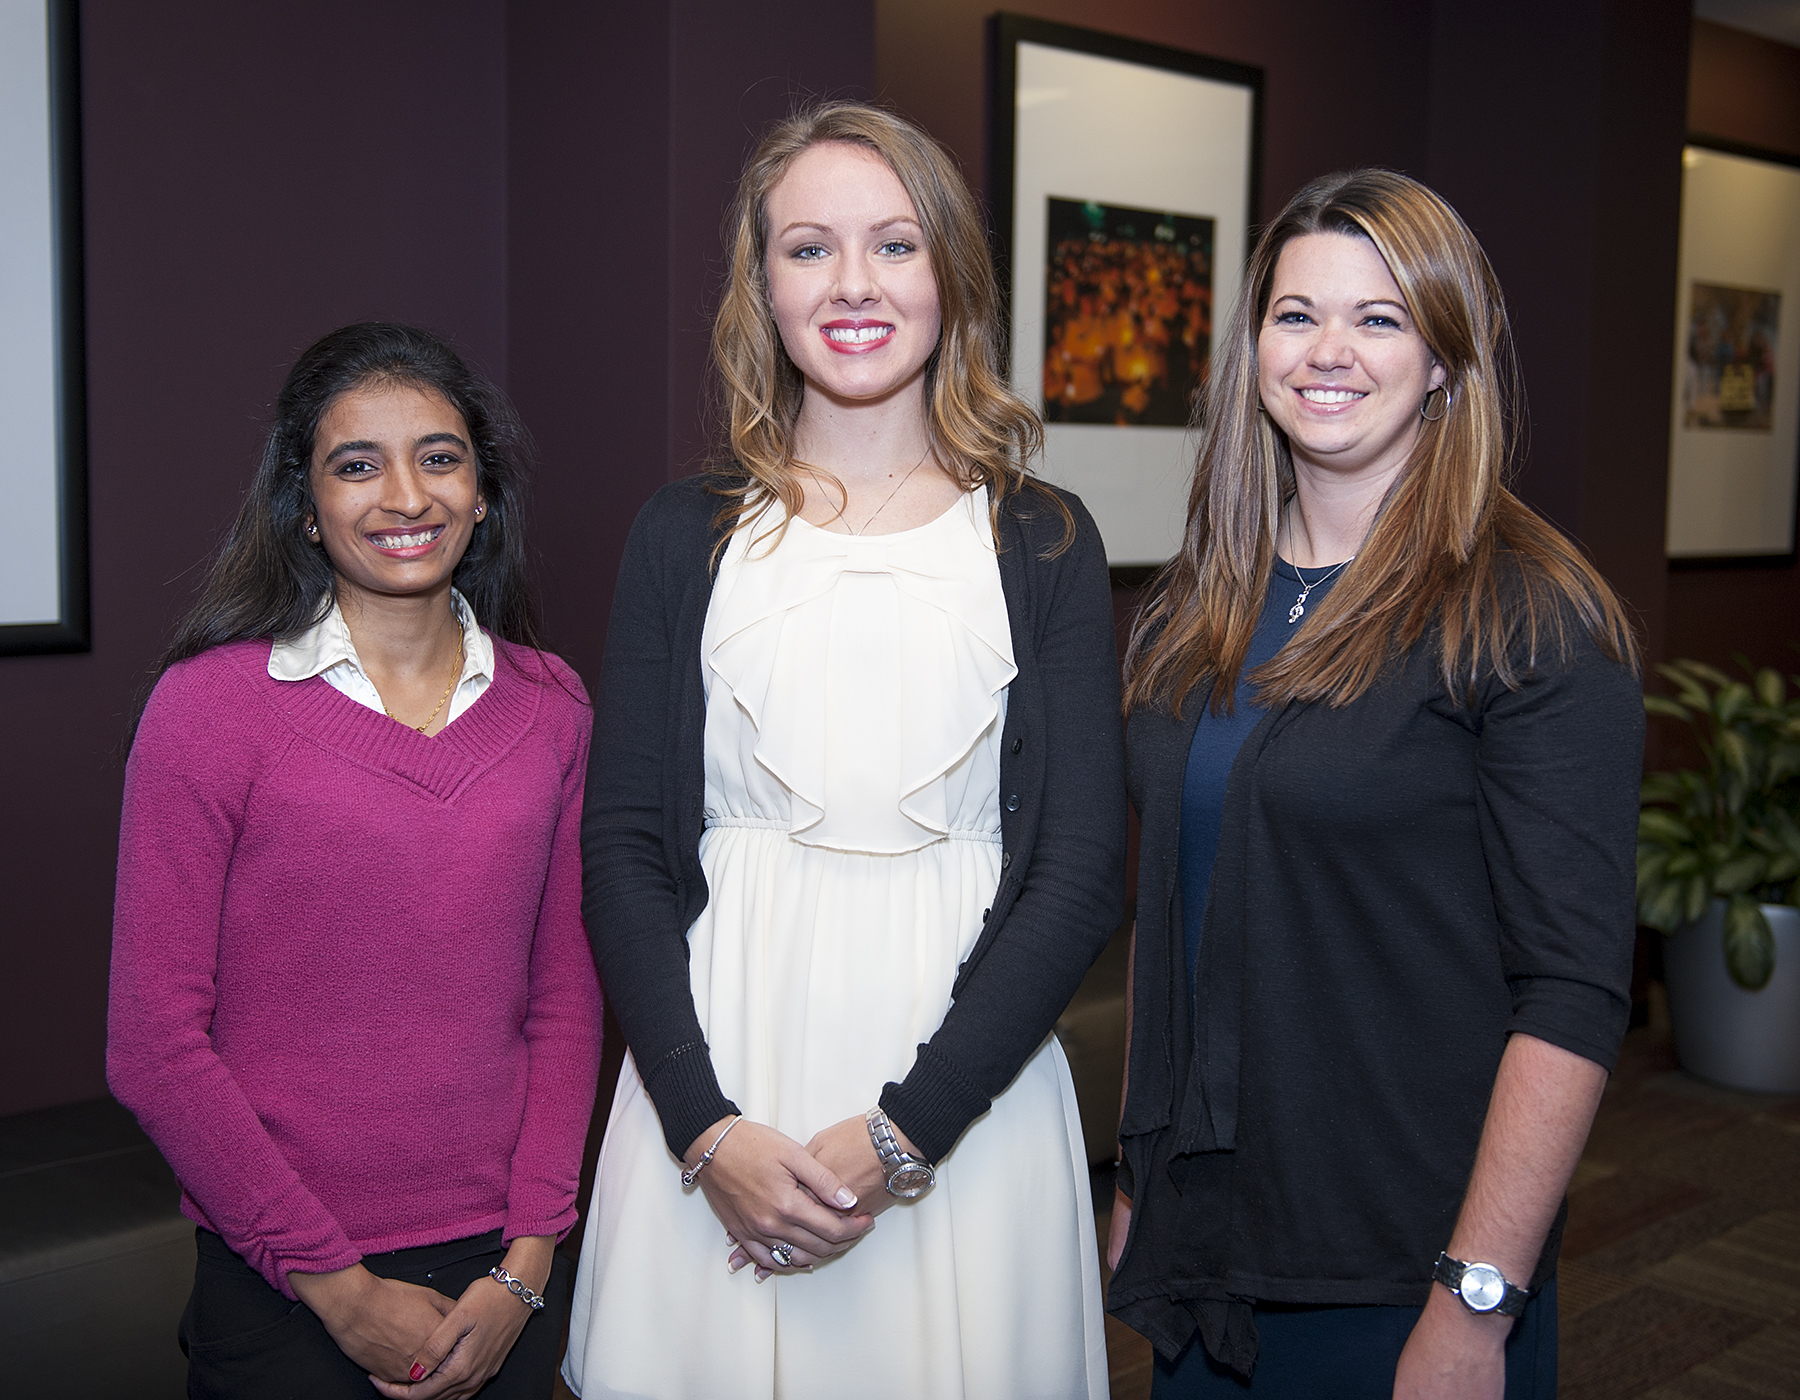 Award winners at MSU's Three Minute Thesis competition included, from left, Mukti Patel, a doctoral student in mechanical engineering, Grand Champion; Sara Fast, a master's student in civil and environmental engineering, People's Choice Award; and Alyssa Barrett, a master's student in agricultural and extension education, Grand Champion Runner Up.